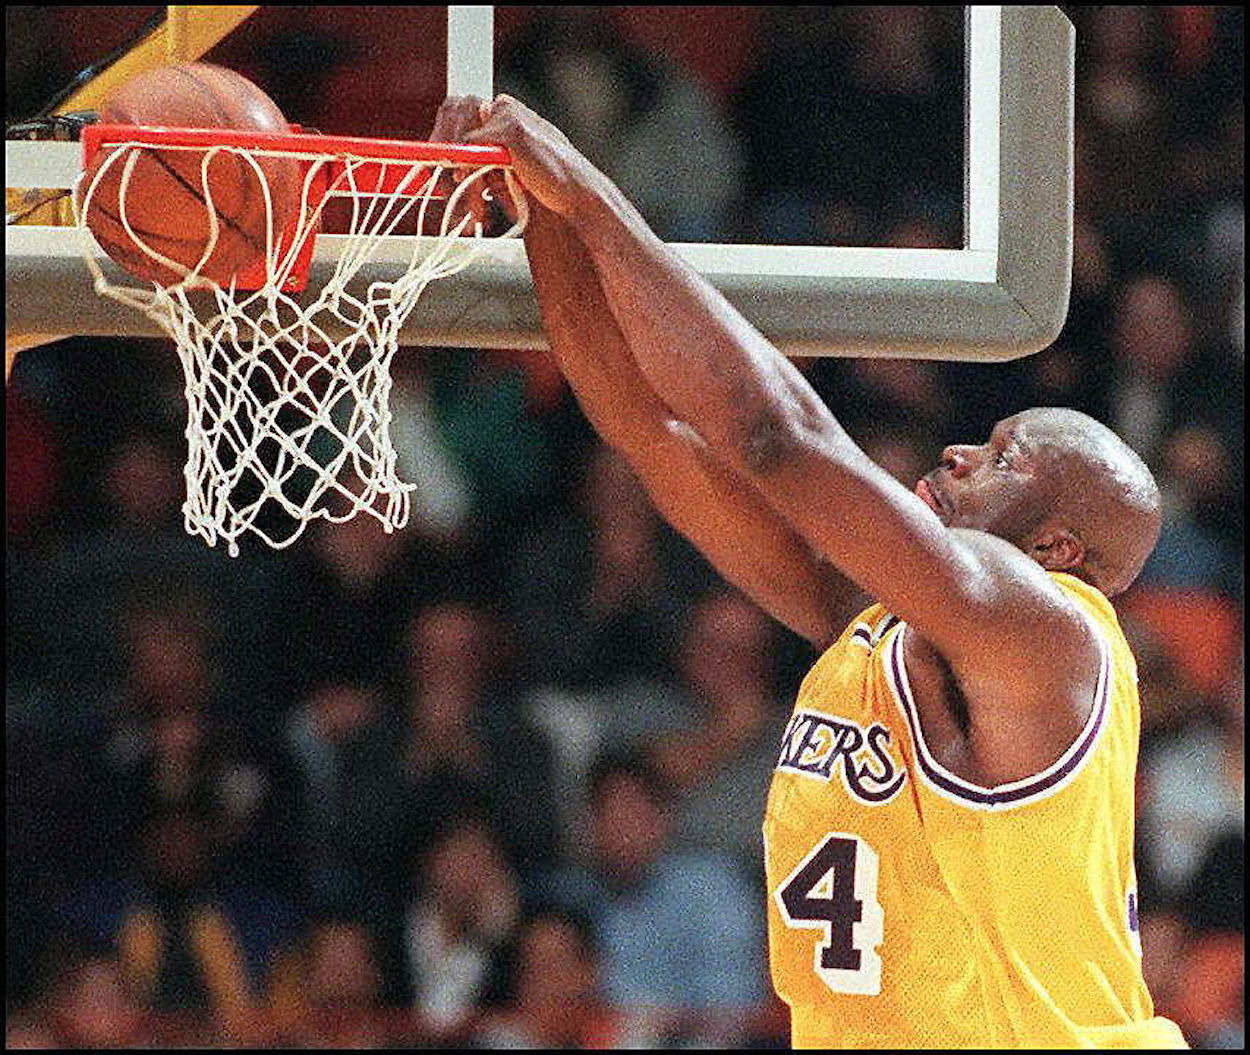 Former LA Lakers center Shaquille O'Neal dunks a basketball.